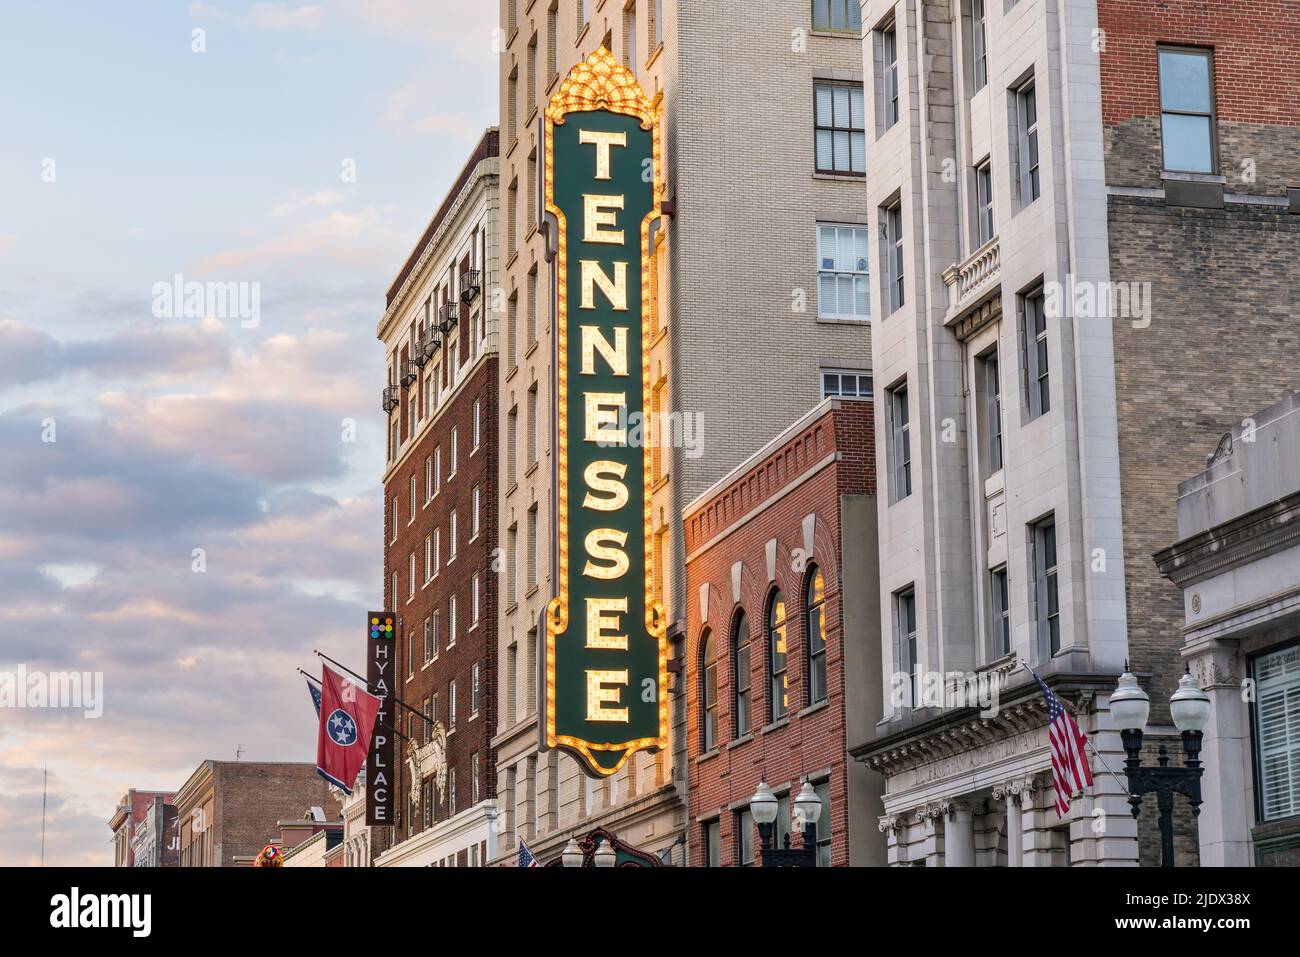 Knoxville, TN - October 9, 2019: The historic Tennessee Theater in downtown Knoxville, Tennesseee was built in October of 1928 Stock Photo